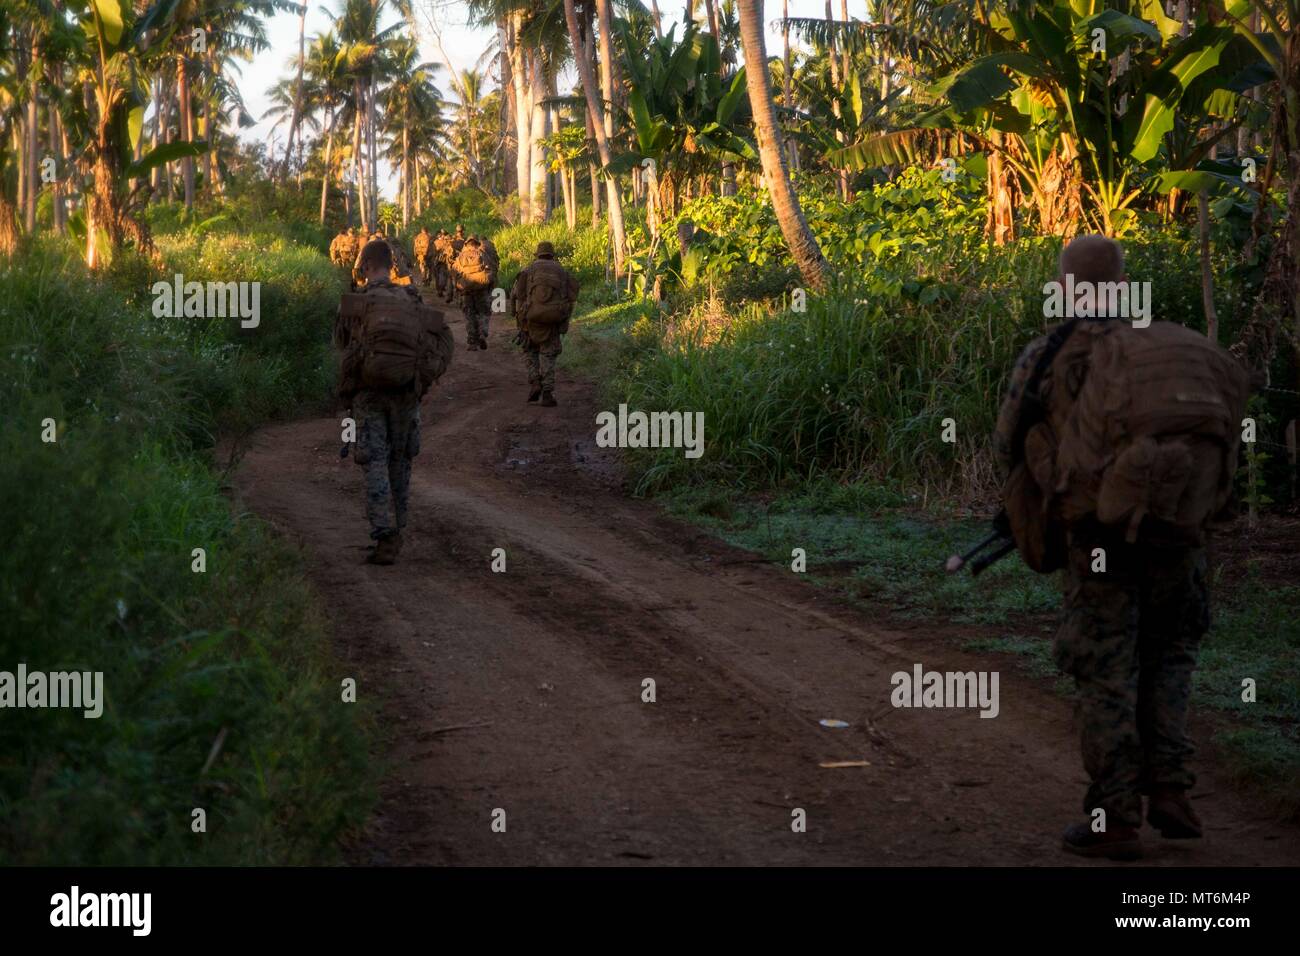 U.S. Marines with 3rd Battalion 4th Marines attached to Task Force Koa Moana 17 move to an objective during a joint service infantry training exercise as a part of Exercise TAFAKULA on Vava’u Island, Tonga, July 26, 2017. Exercise TAFAKULA is designed to strengthen the military-to-military, and community relations between Tonga’s His Majesty’s Armed Forces, French Army of New Caledonia, New Zealand Defense Force, and the United States Armed Forces.  (U.S. Marine Corps photo by MCIPAC Combat Camera Lance Cpl. Juan C. Bustos) Stock Photo